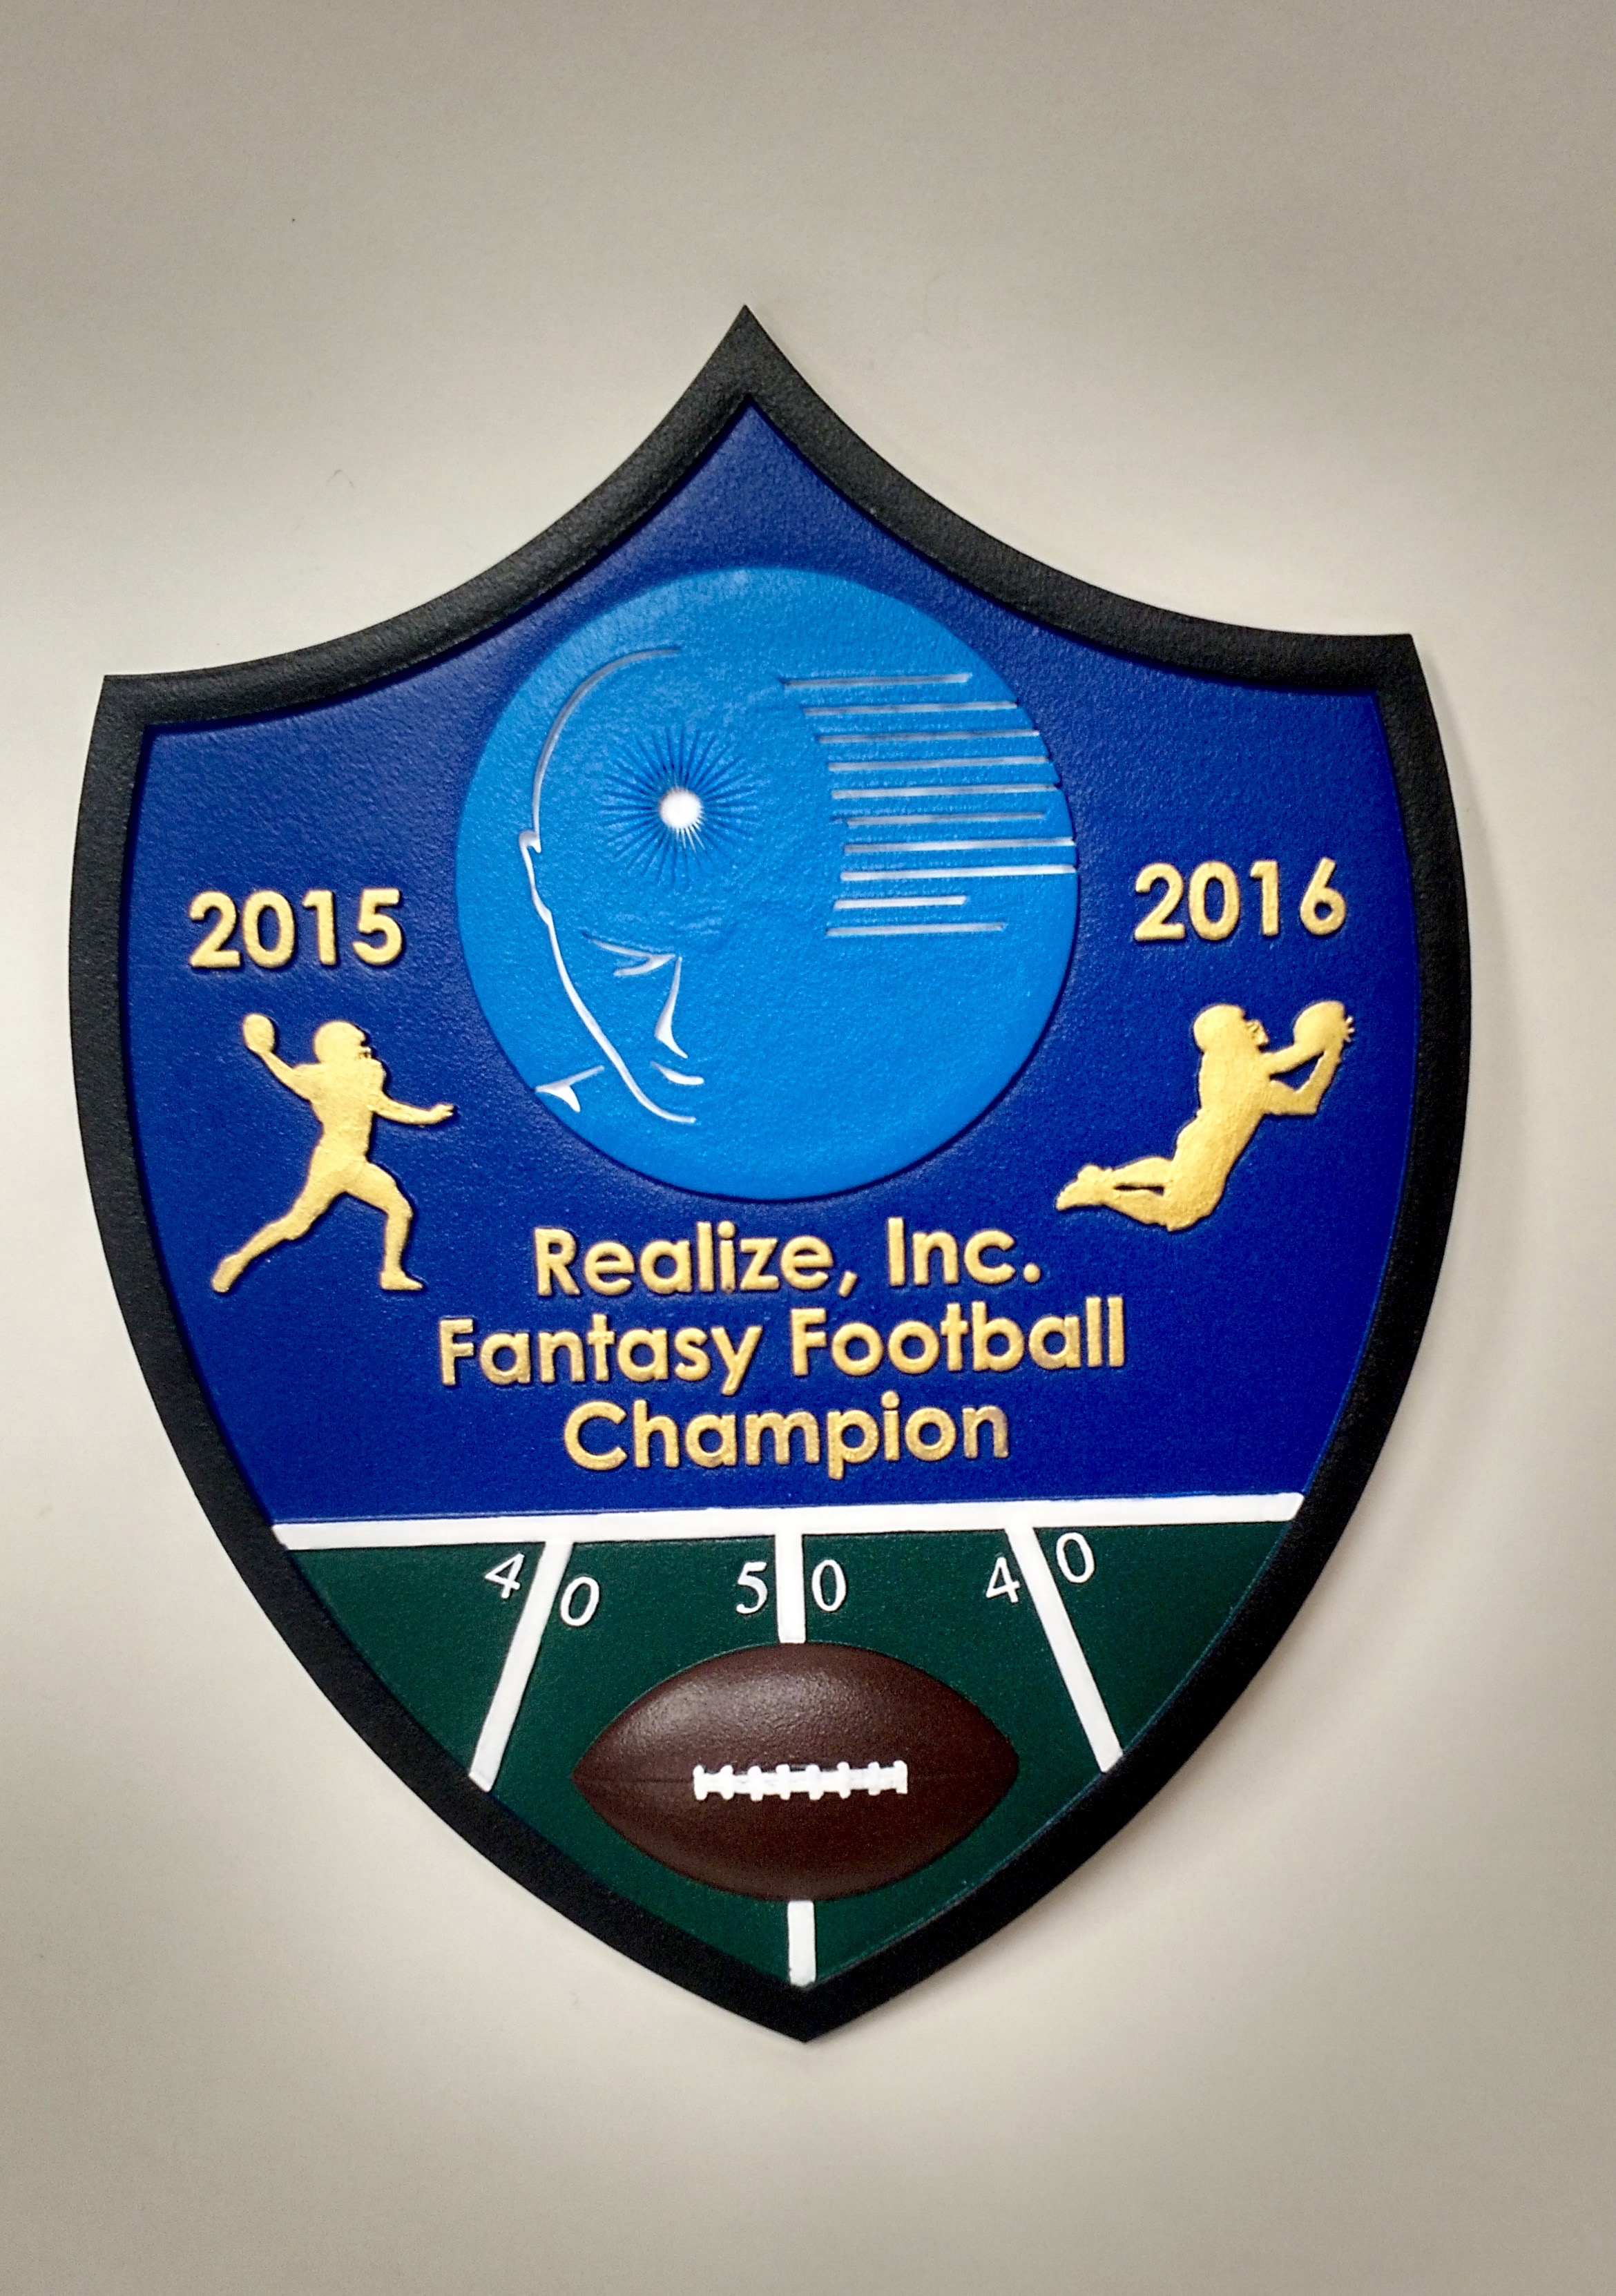 The 3D Printed Fantasy Football Championship Trophy